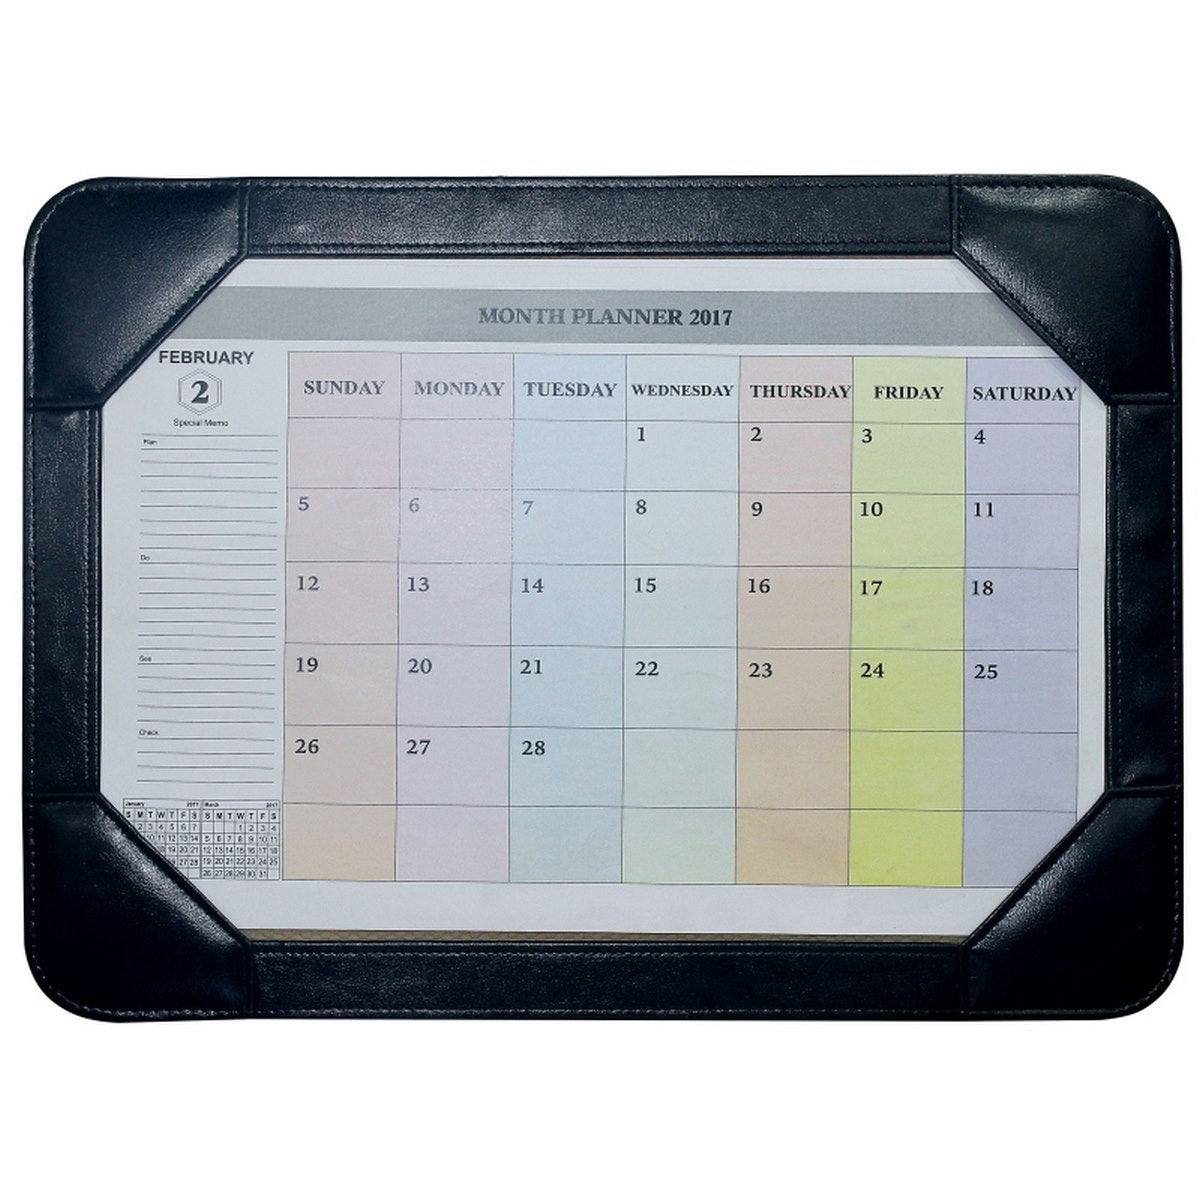 Black Table Monthly Planner - For Shops, Schools, Office Use, Corporate Gifting